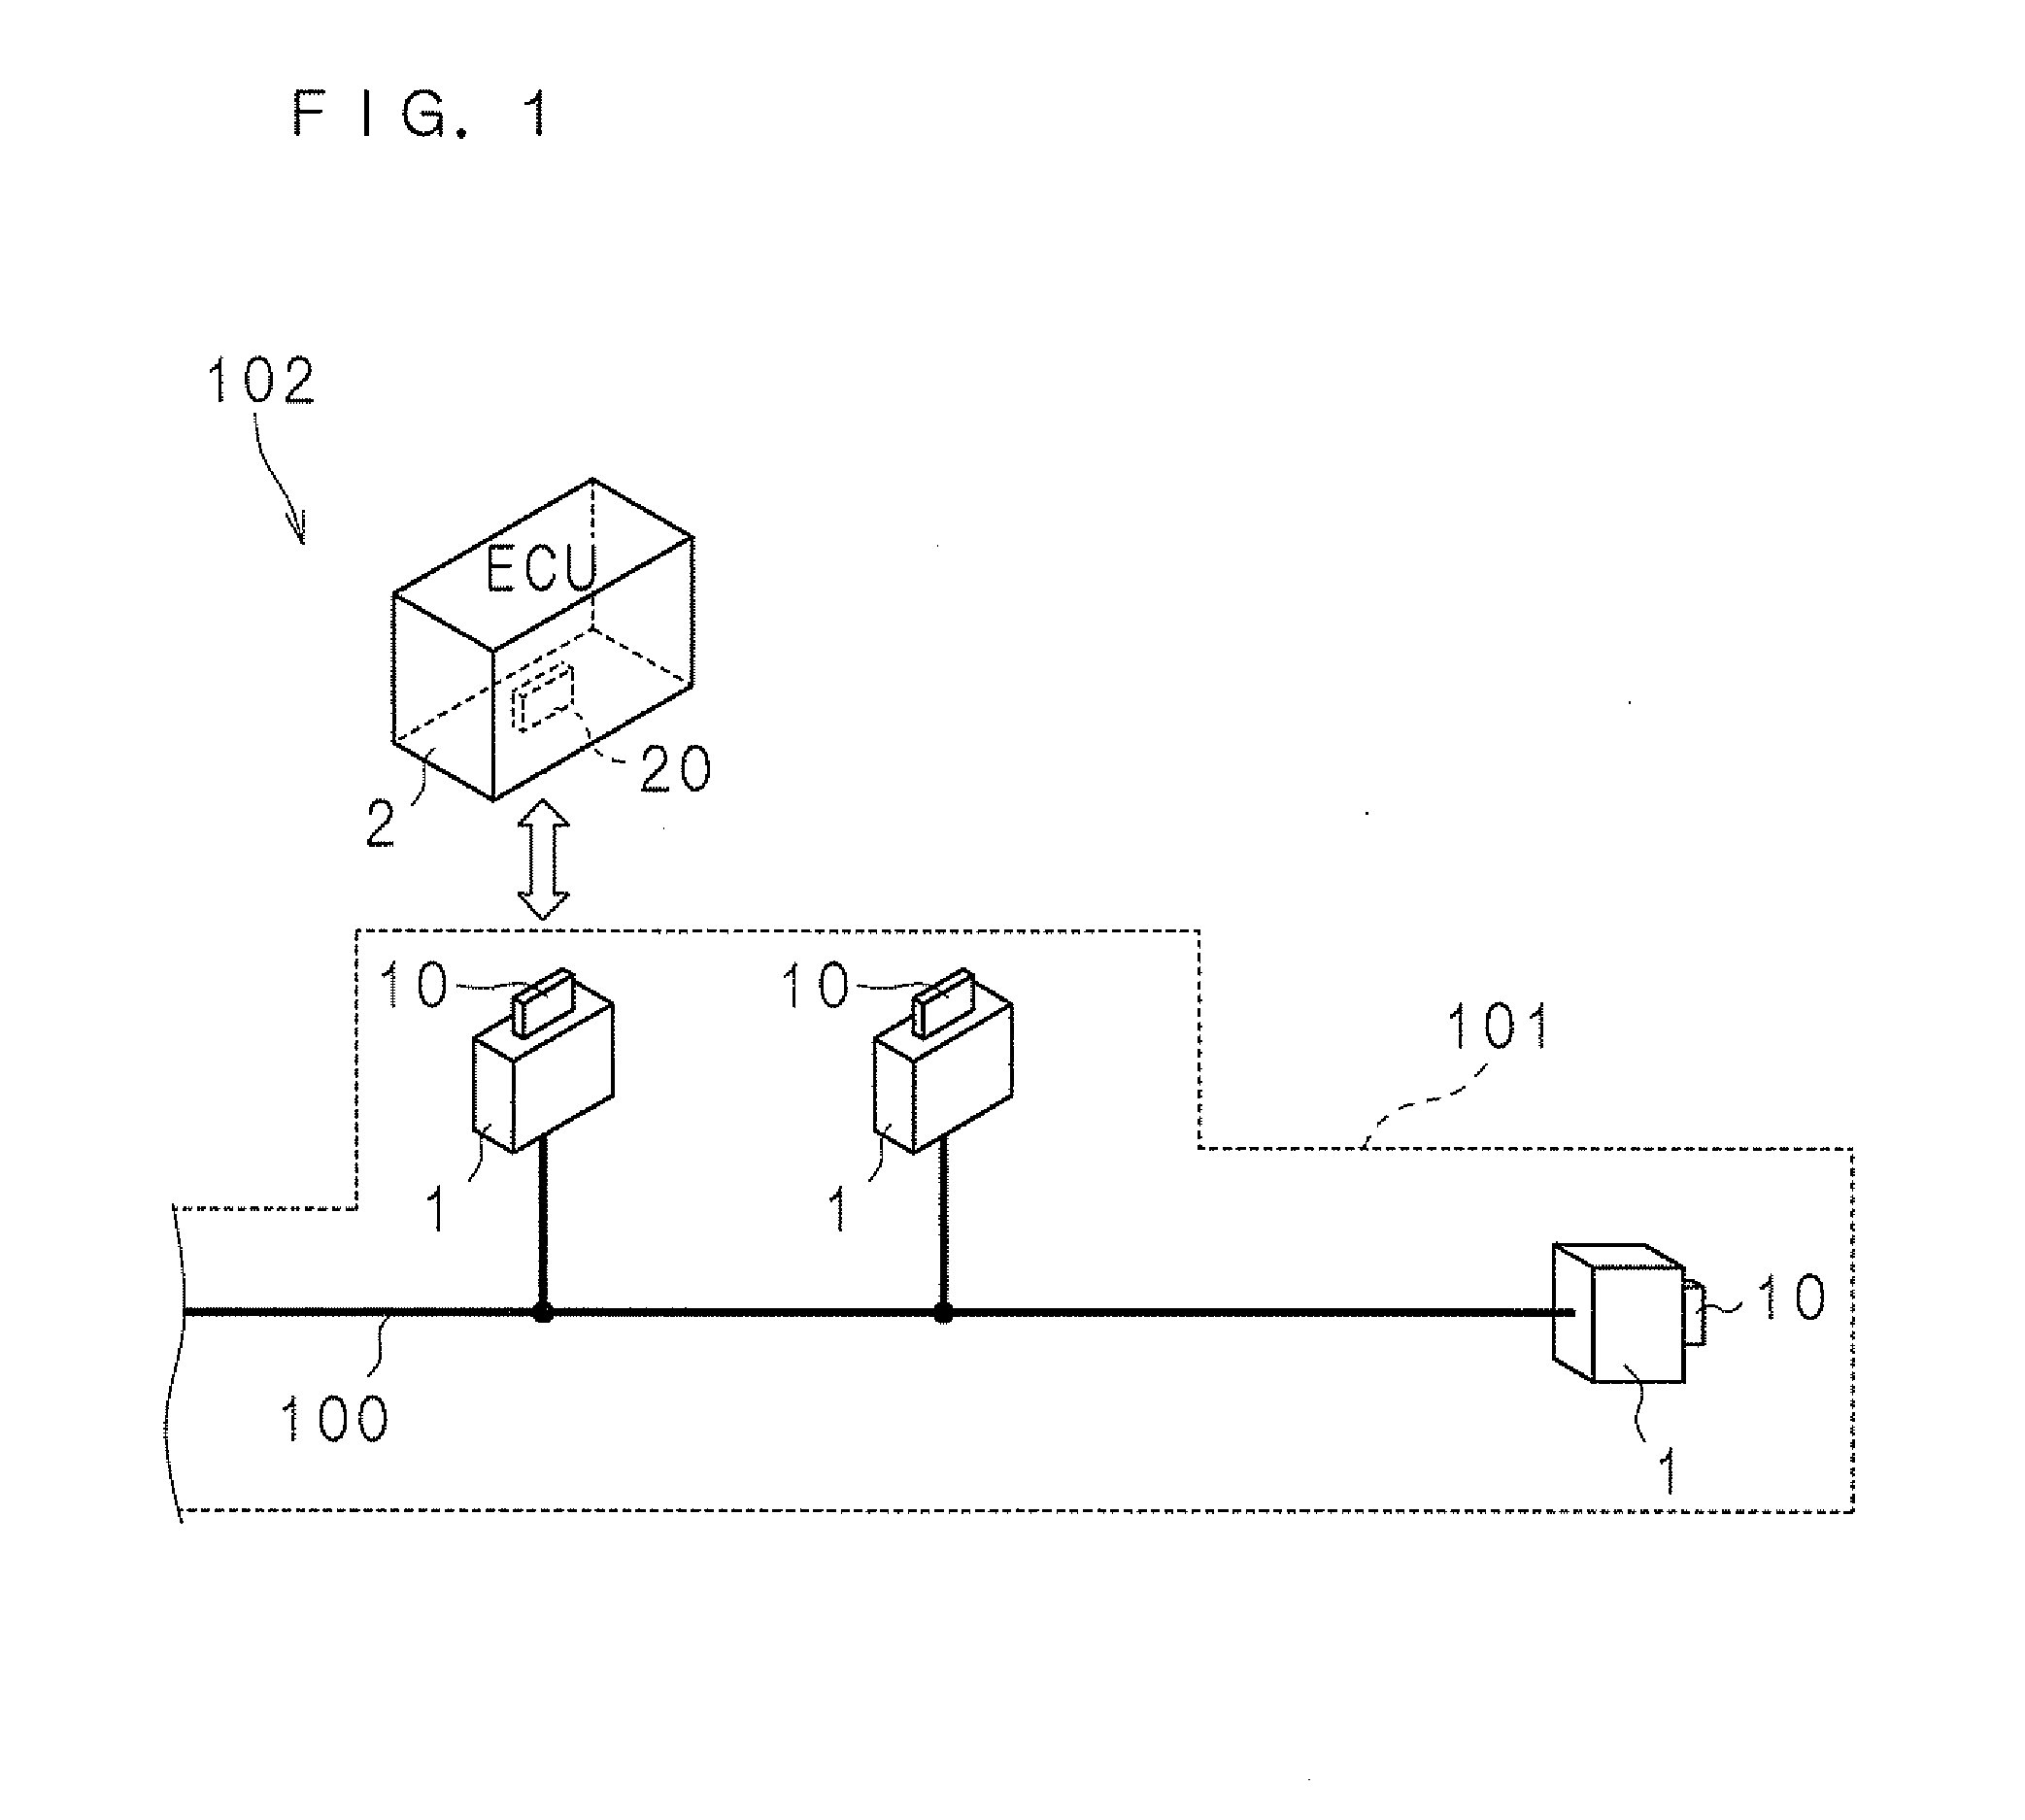 Connectors for communication, communication harness, and communication system